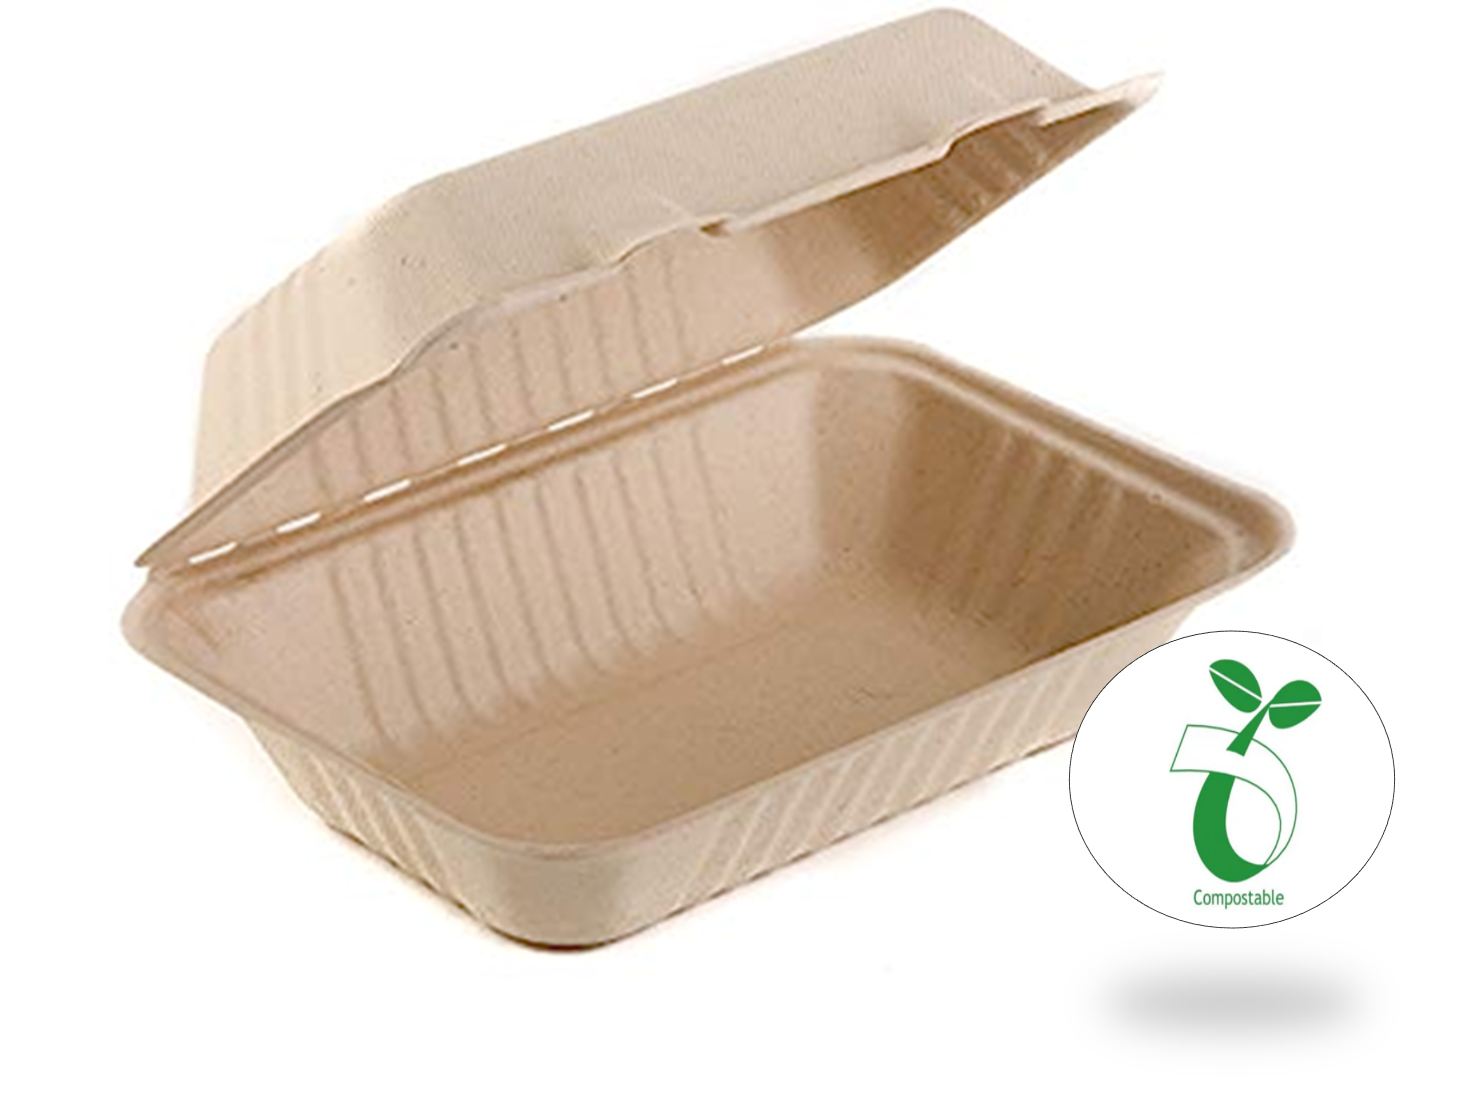 Reduce landfill with these compostable 3-compartment 9-in x 6-in x 3-in Bagasse Hinged Clamshell Food Containers constructed with reclaimed sugarcane. 